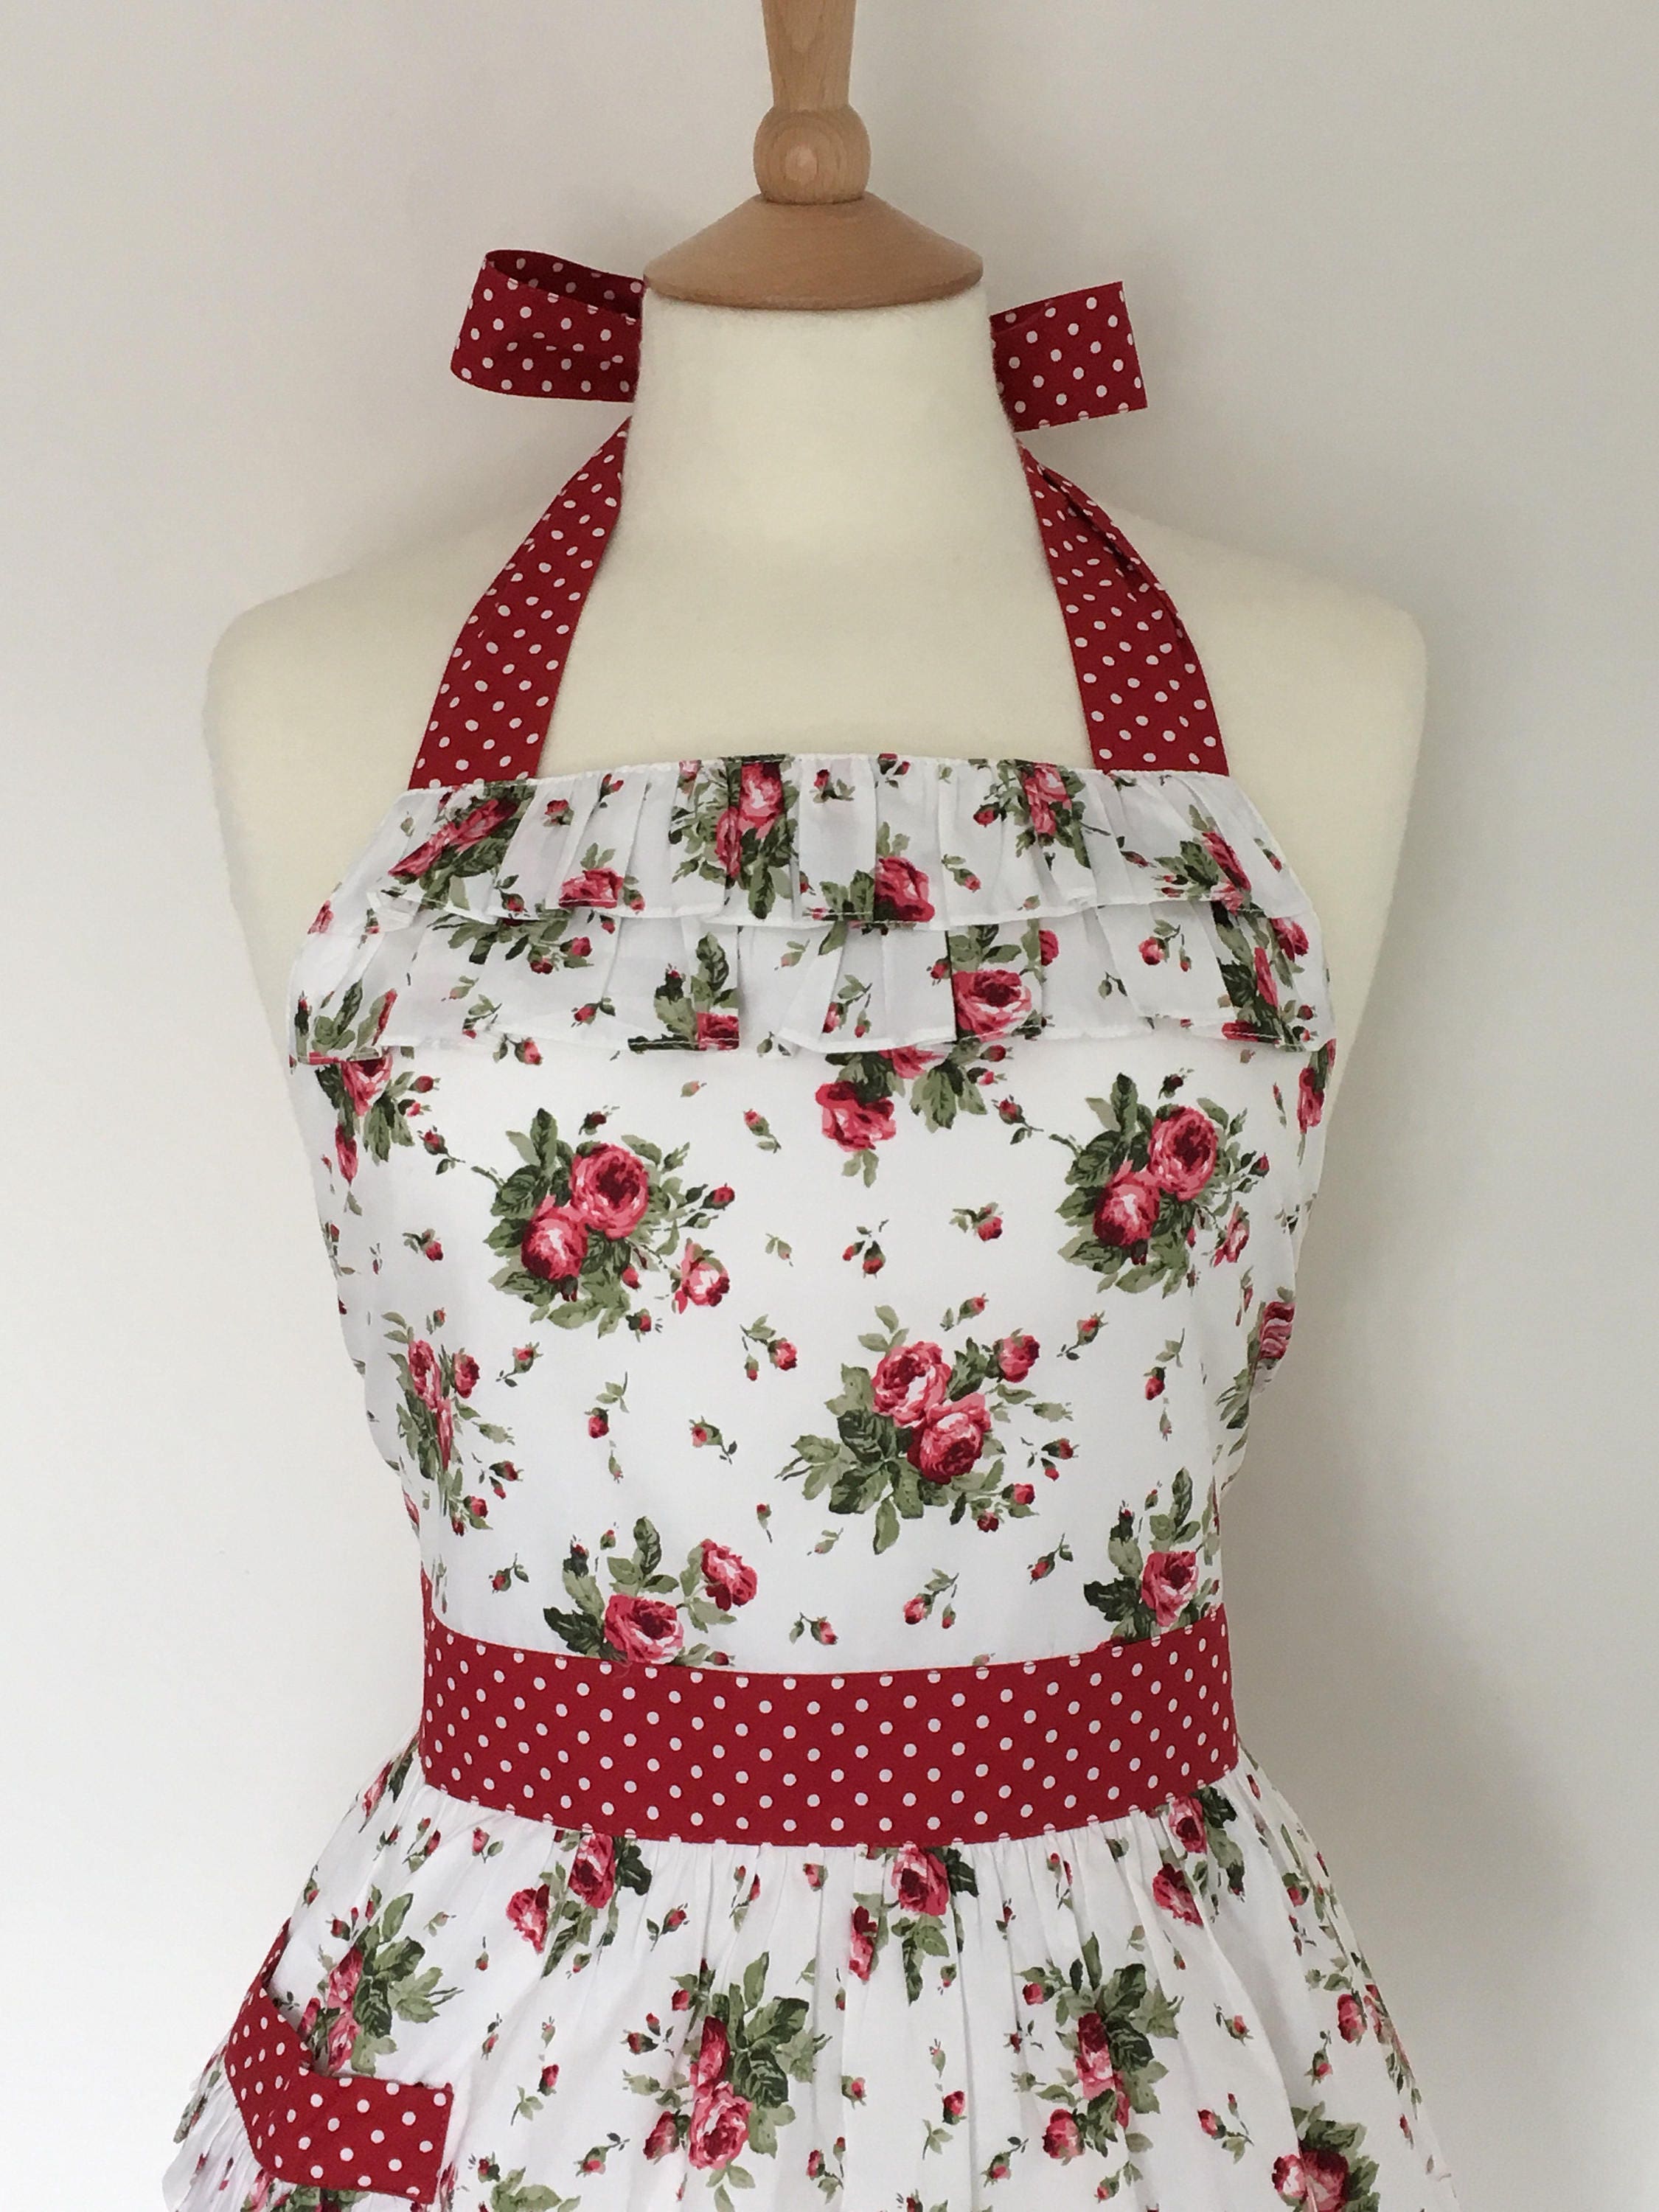 Retro Apron With Ruffles Vintage Red Floral Pattern 1950s